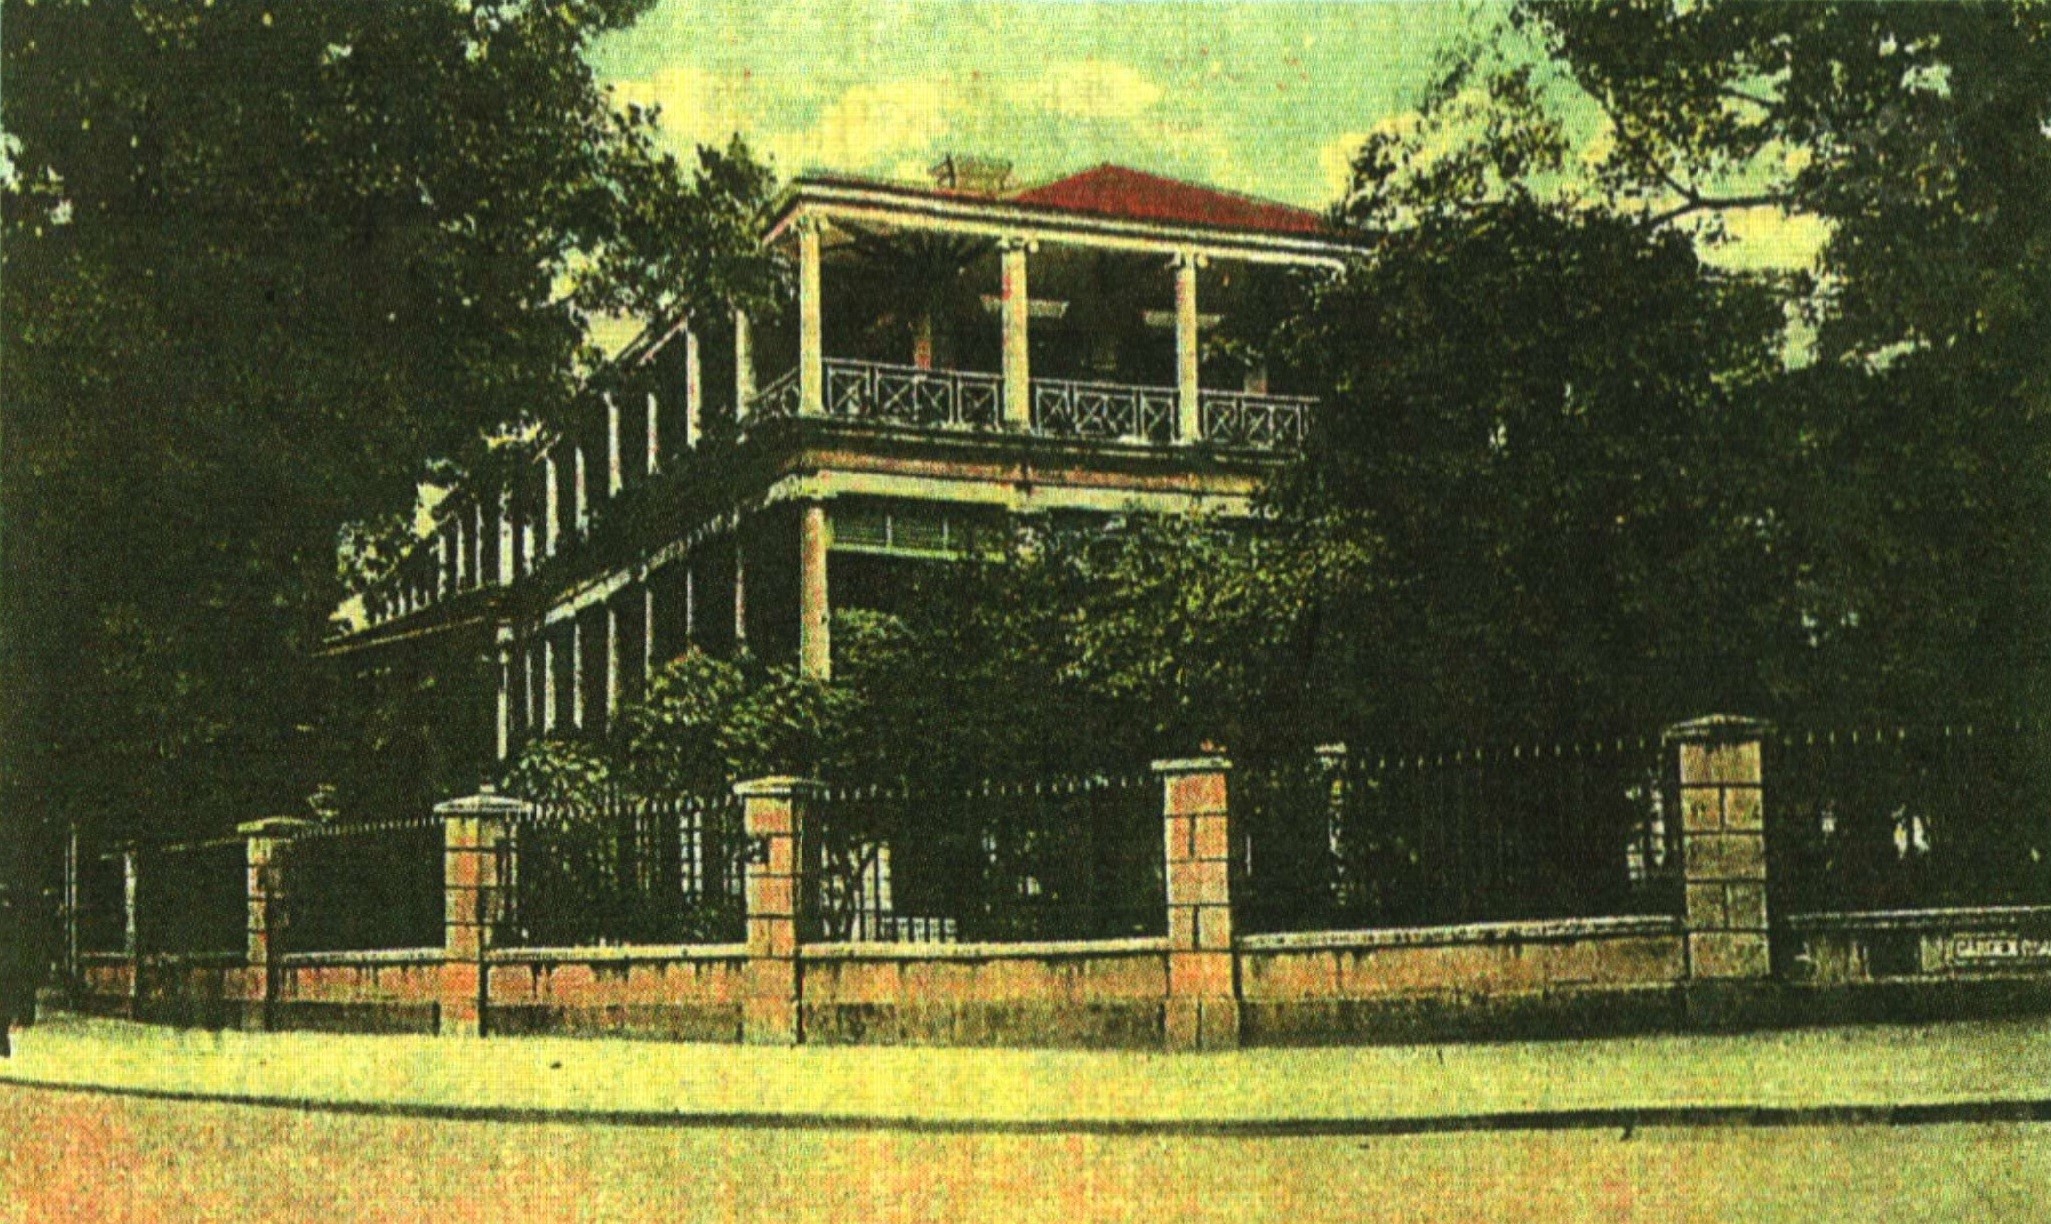 Murray House in 1915